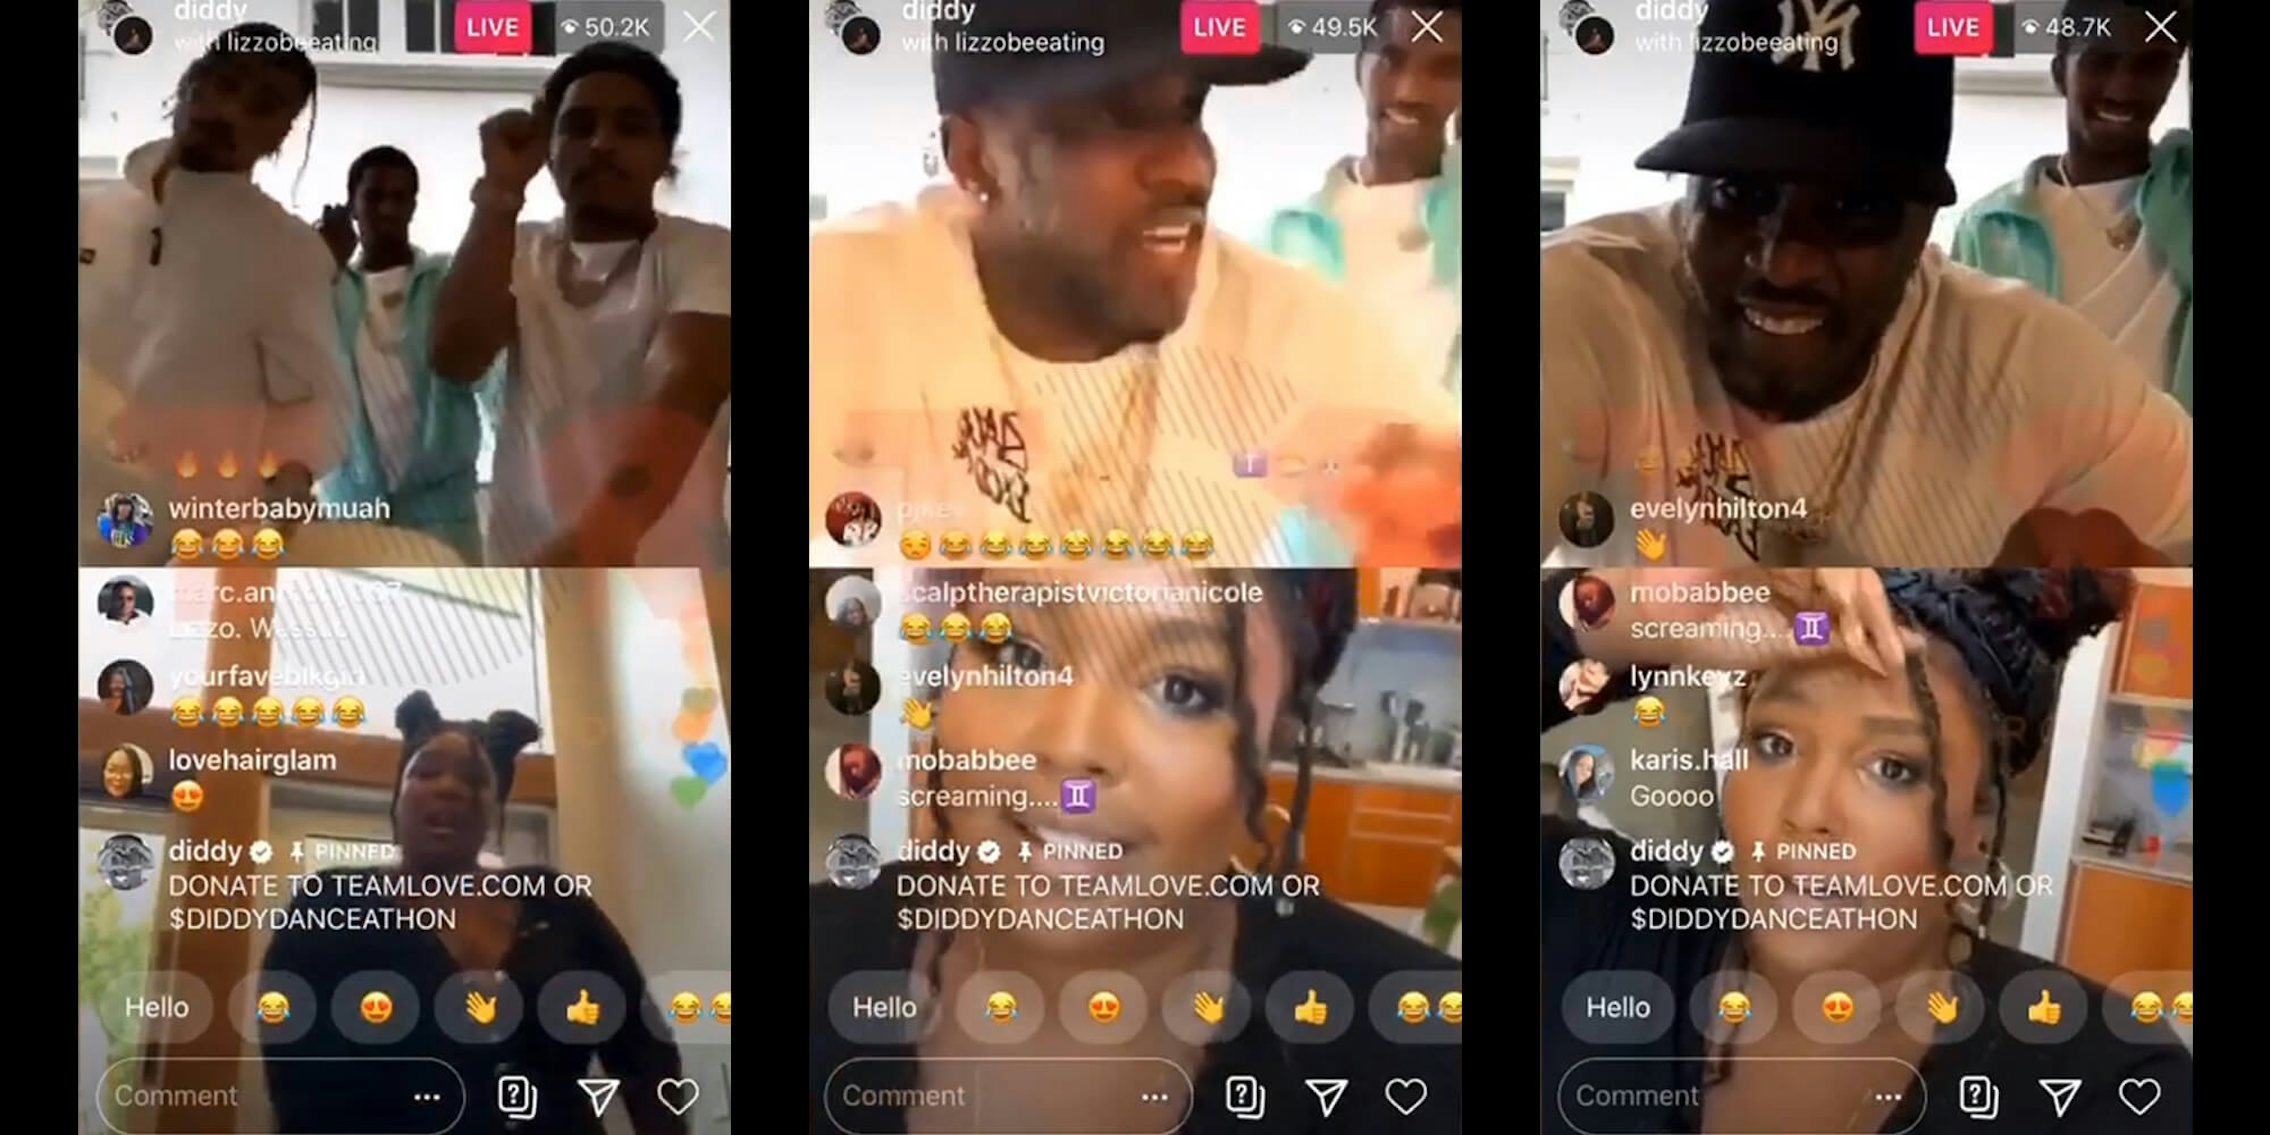 diddy stopping lizzo from twerking on Easter